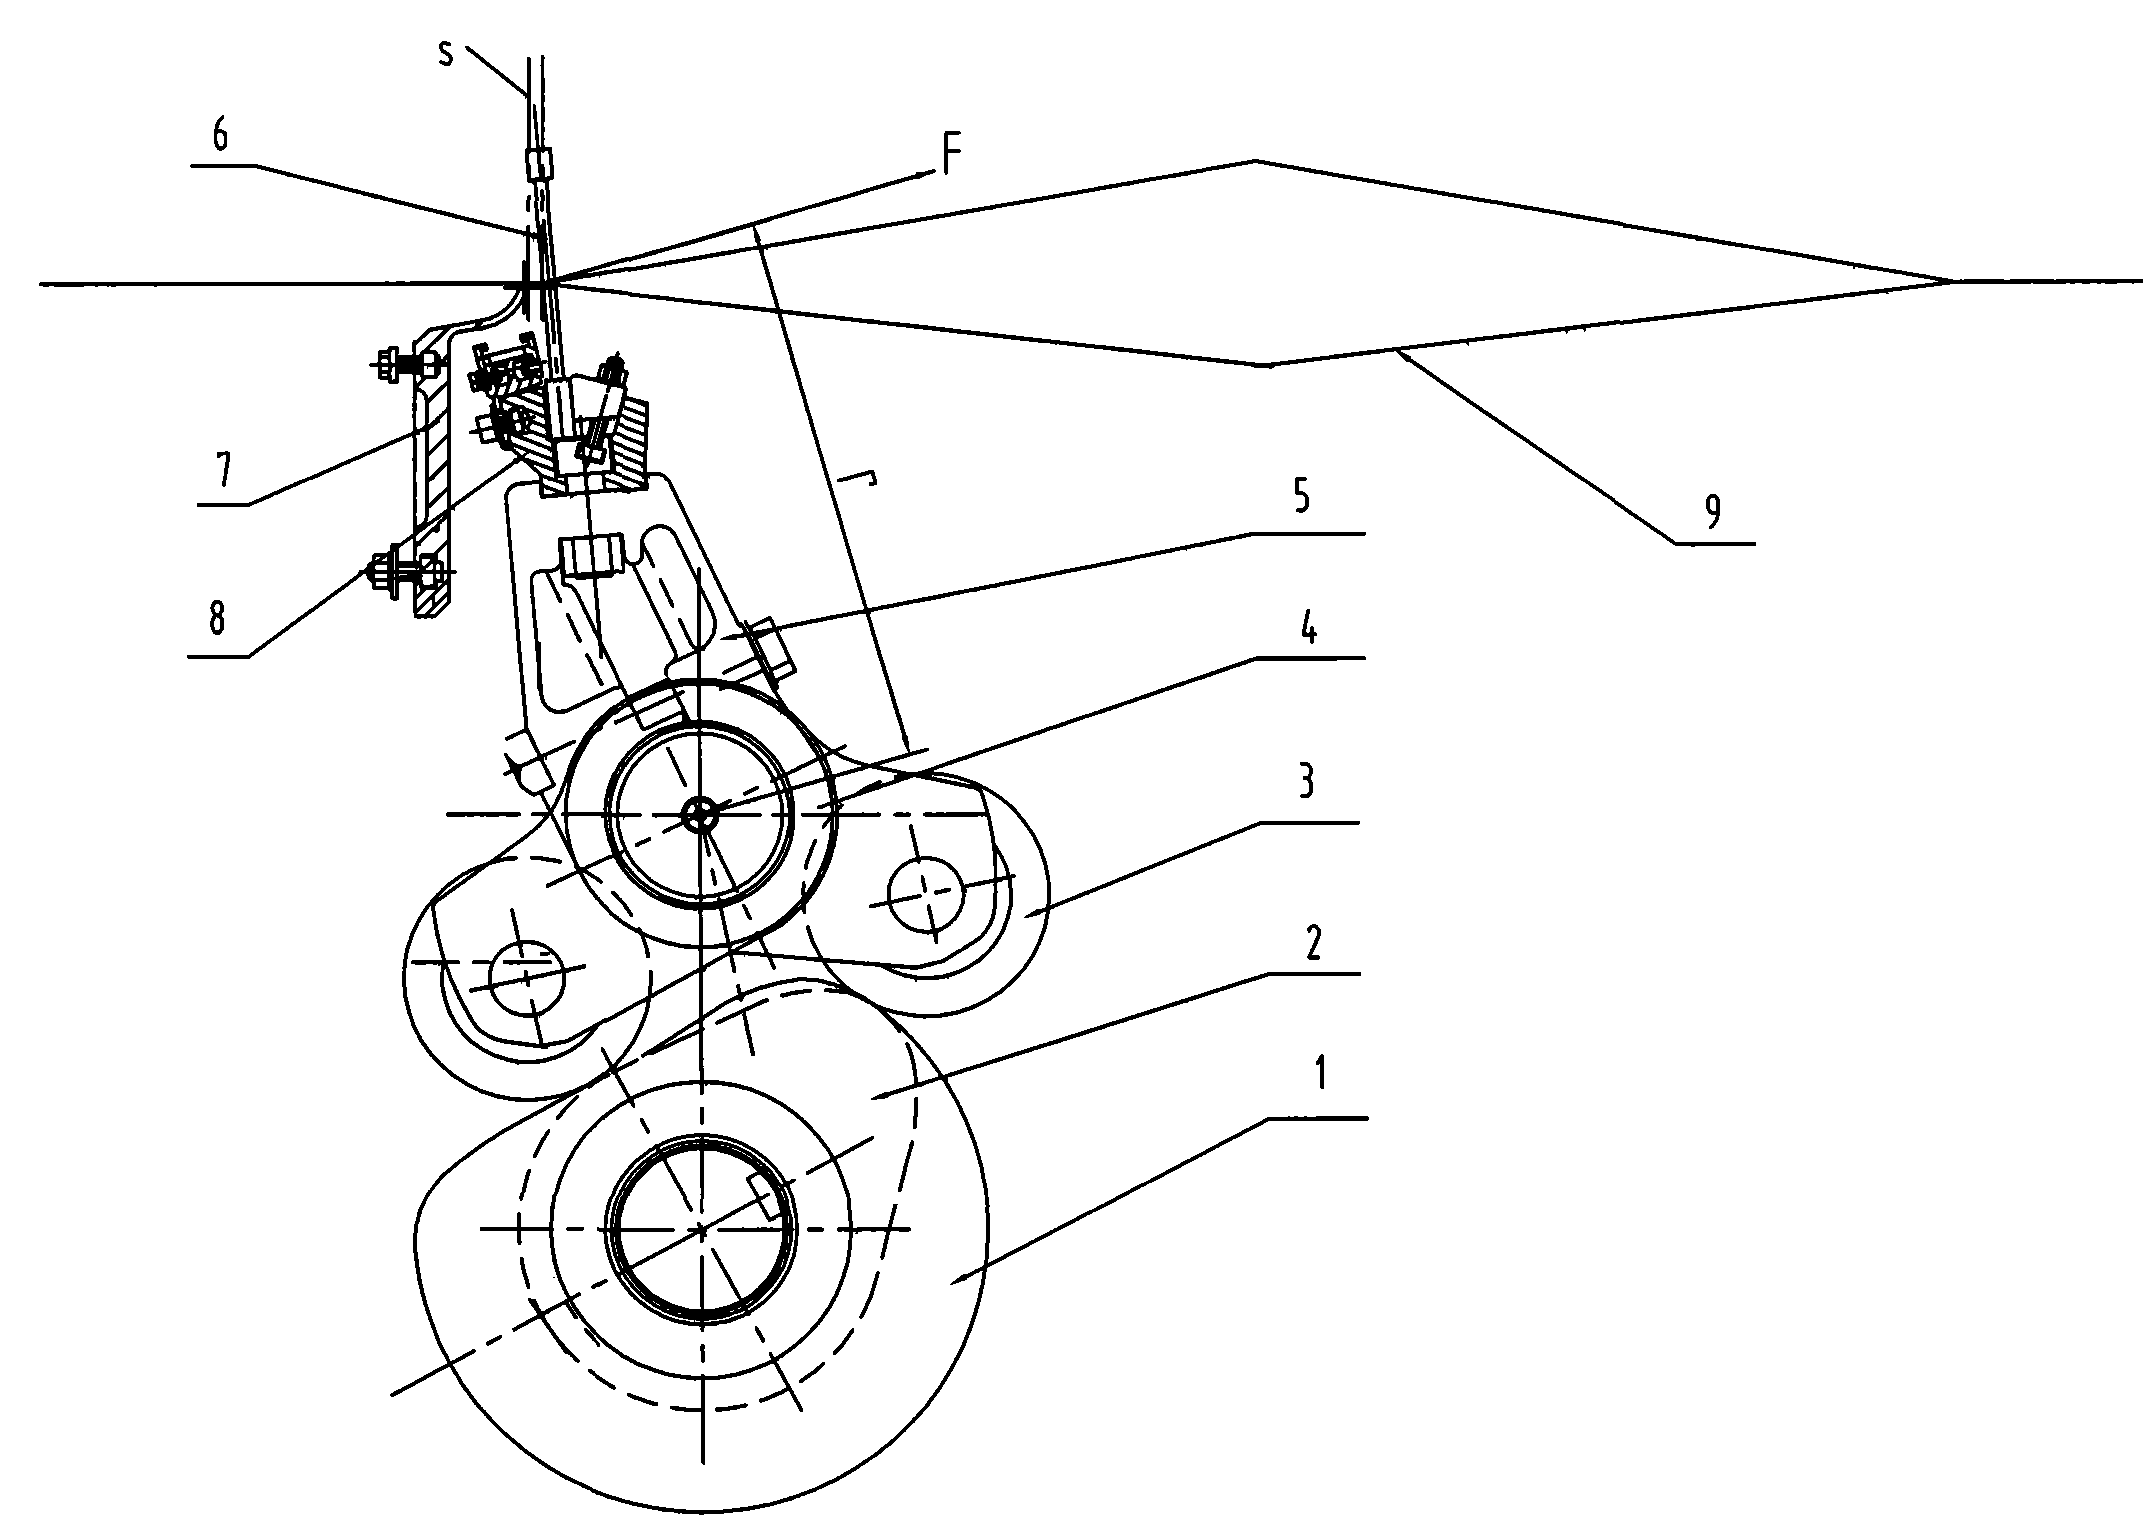 Non-inertial beating-up mechanism of weaving machine and sley motion method for implementing non-inertial beating-up